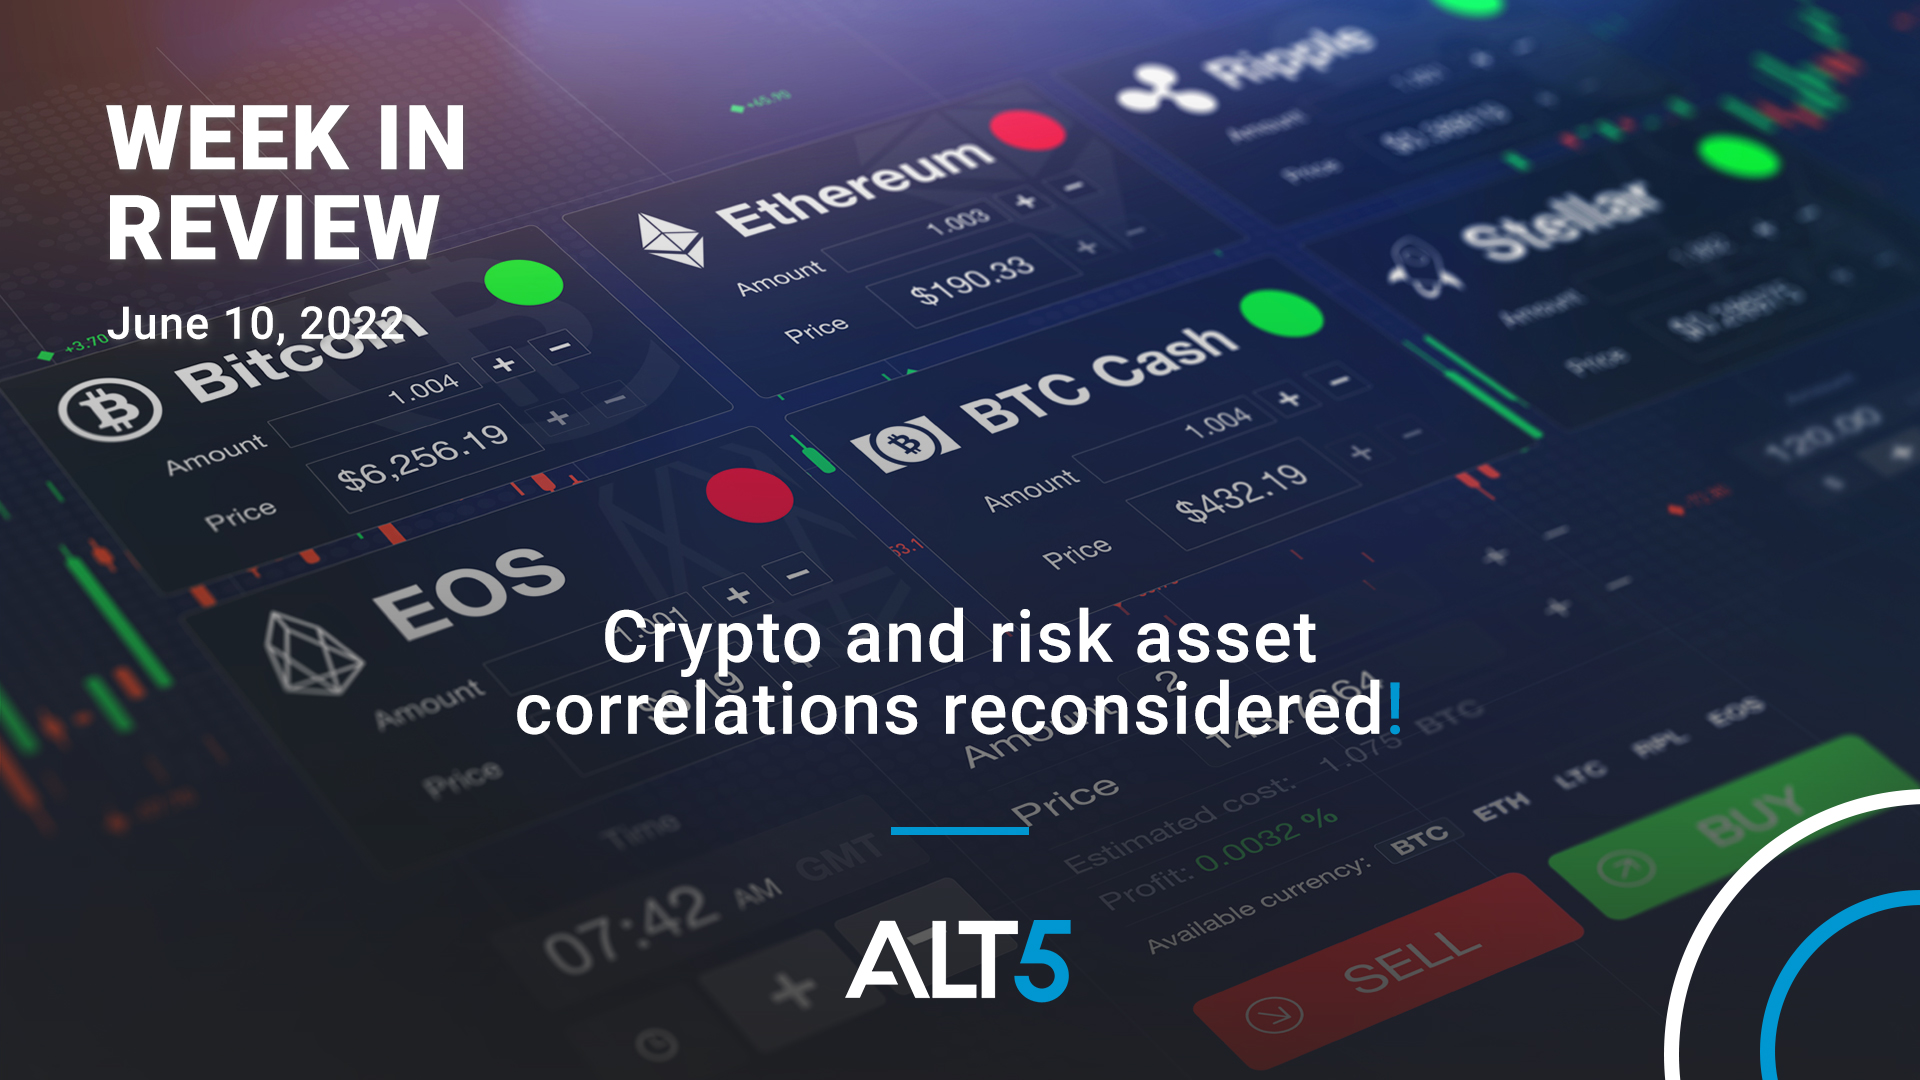 Week in review: June 10 2022 - Crypto and Risk Asset Correlations Reconsidered